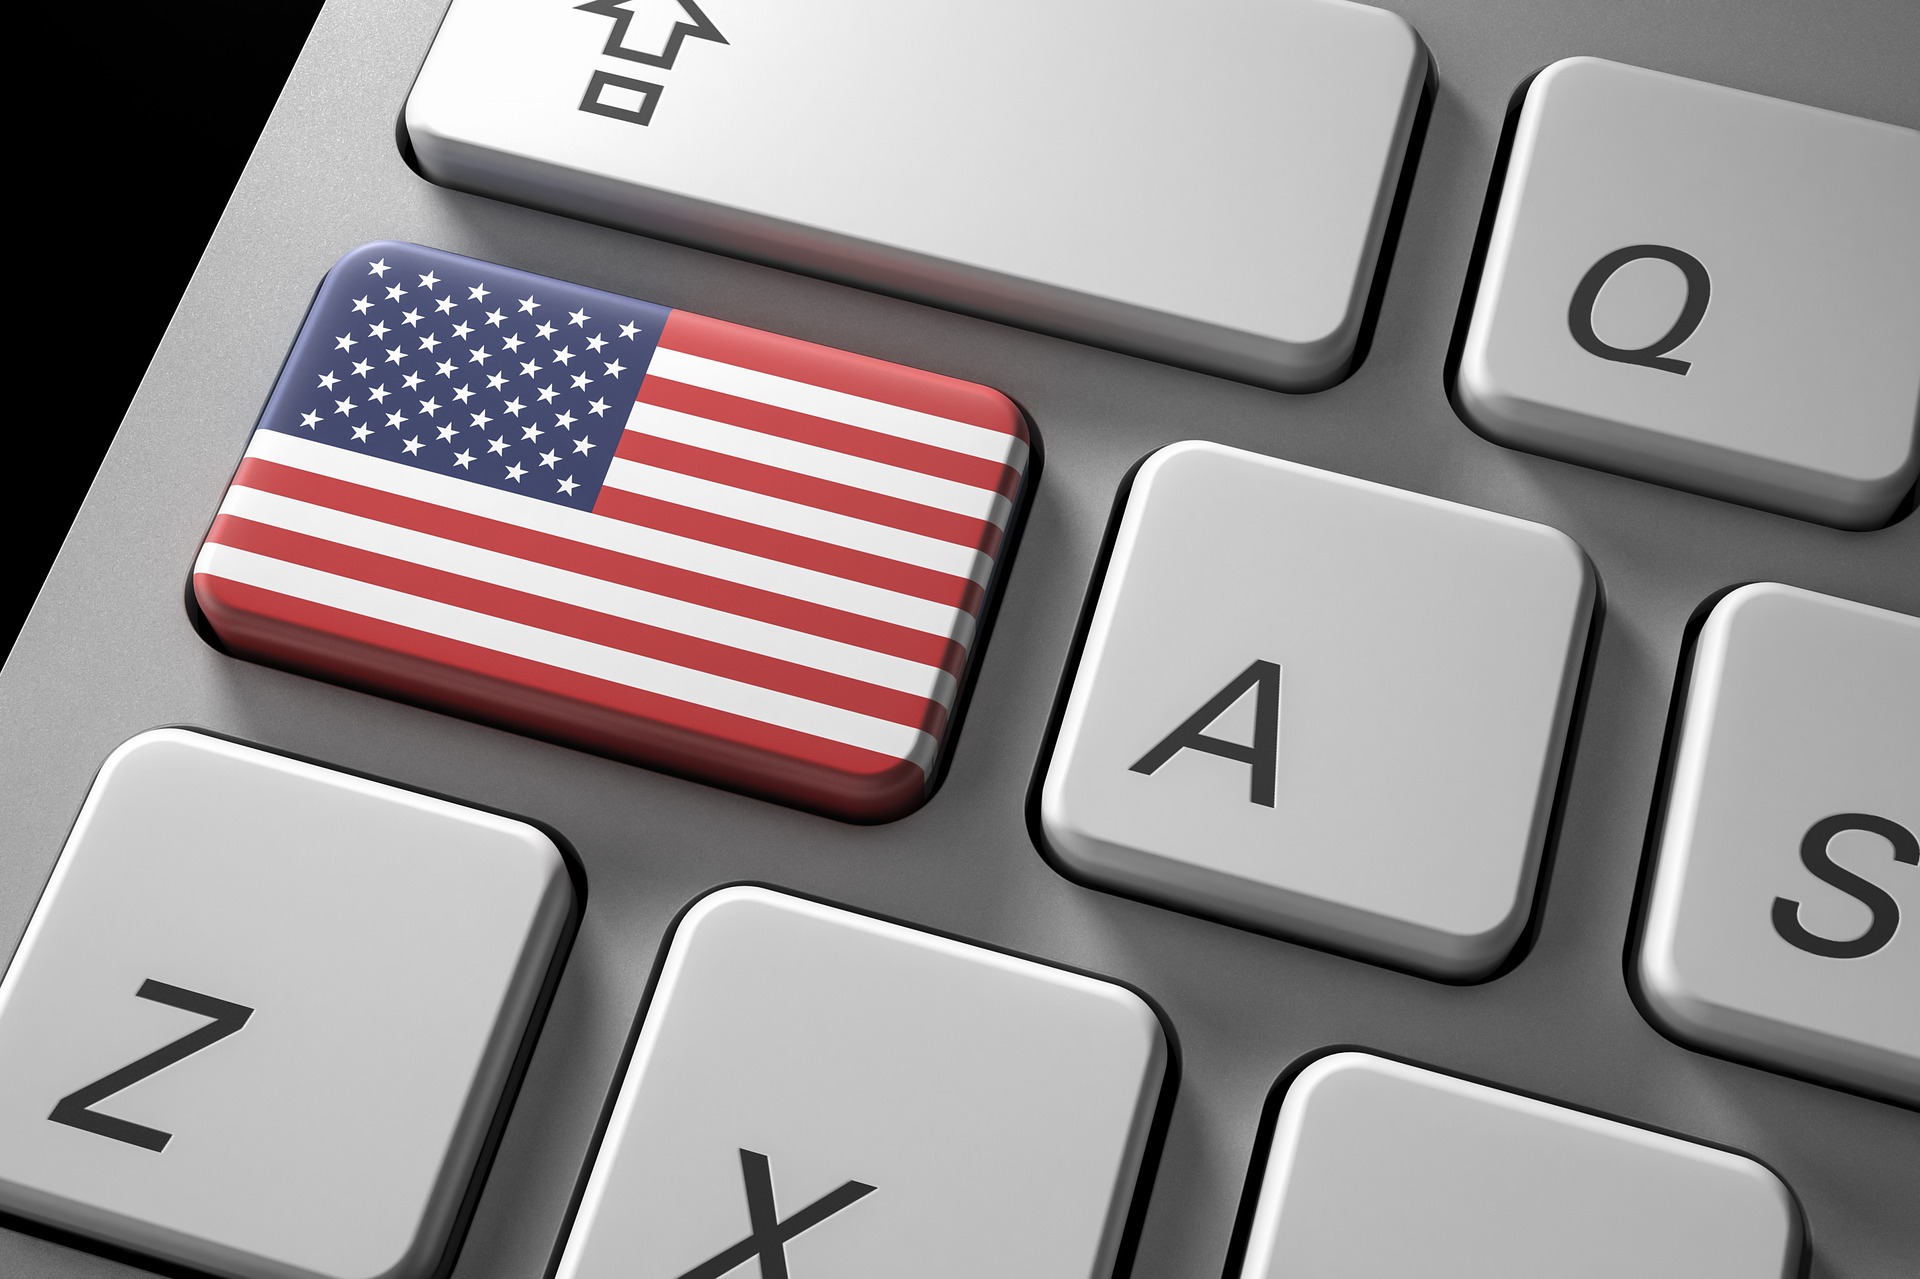 Keyboard with an American flag on a key symbolizing English medical translation services.